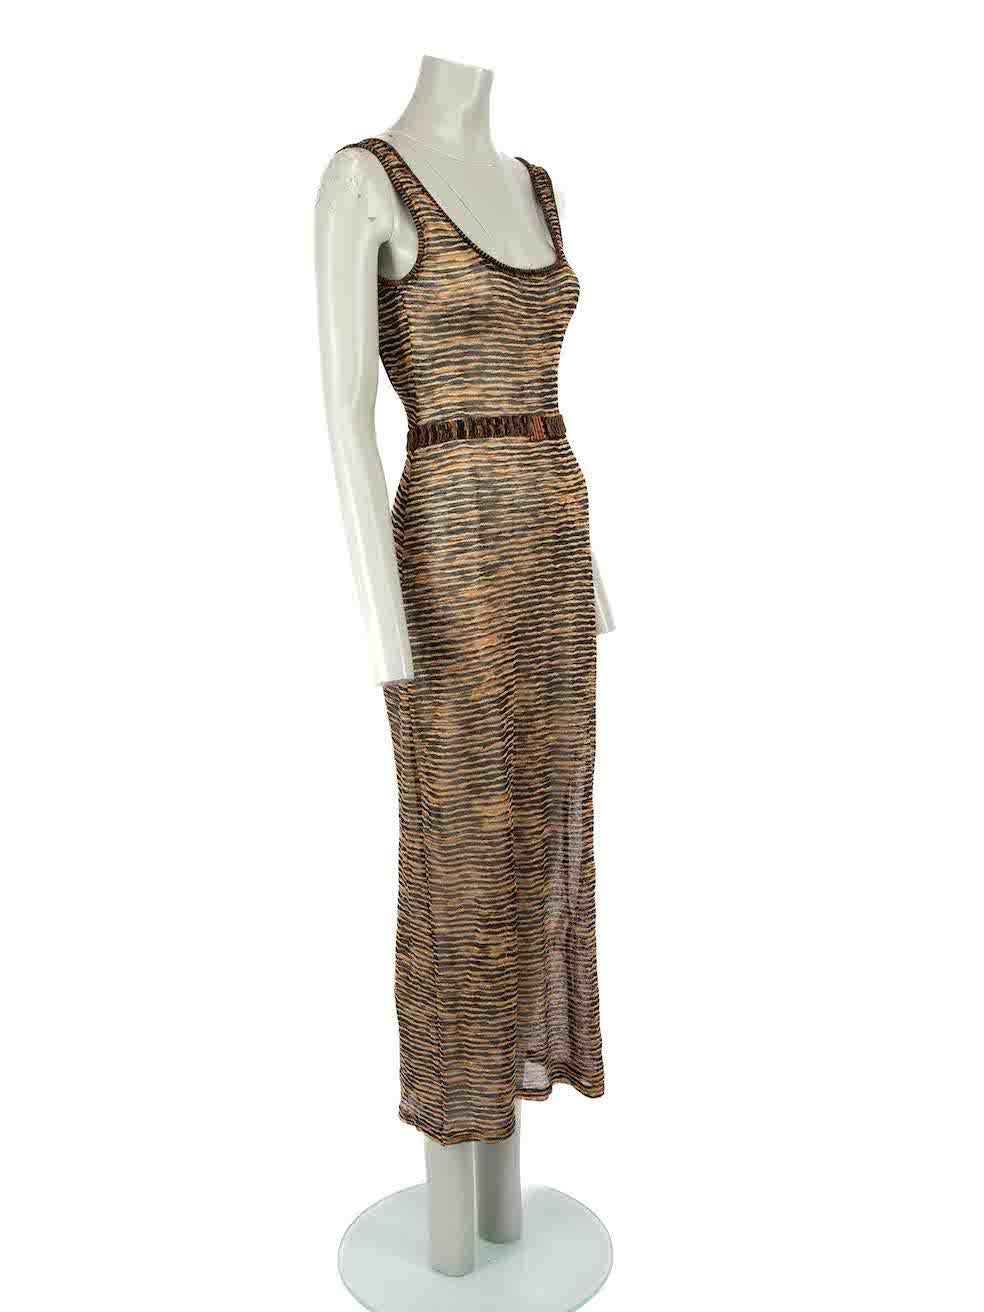 CONDITION is Very good. Minimal wear to dress is evident. Minimal wear to the front and neckline lining with pulls to the weave on this used Missoni Mare designer resale item.
 
 Details
 Gold
 Synthetic
 Woven knit dress
 Maxi length
 Sheer and